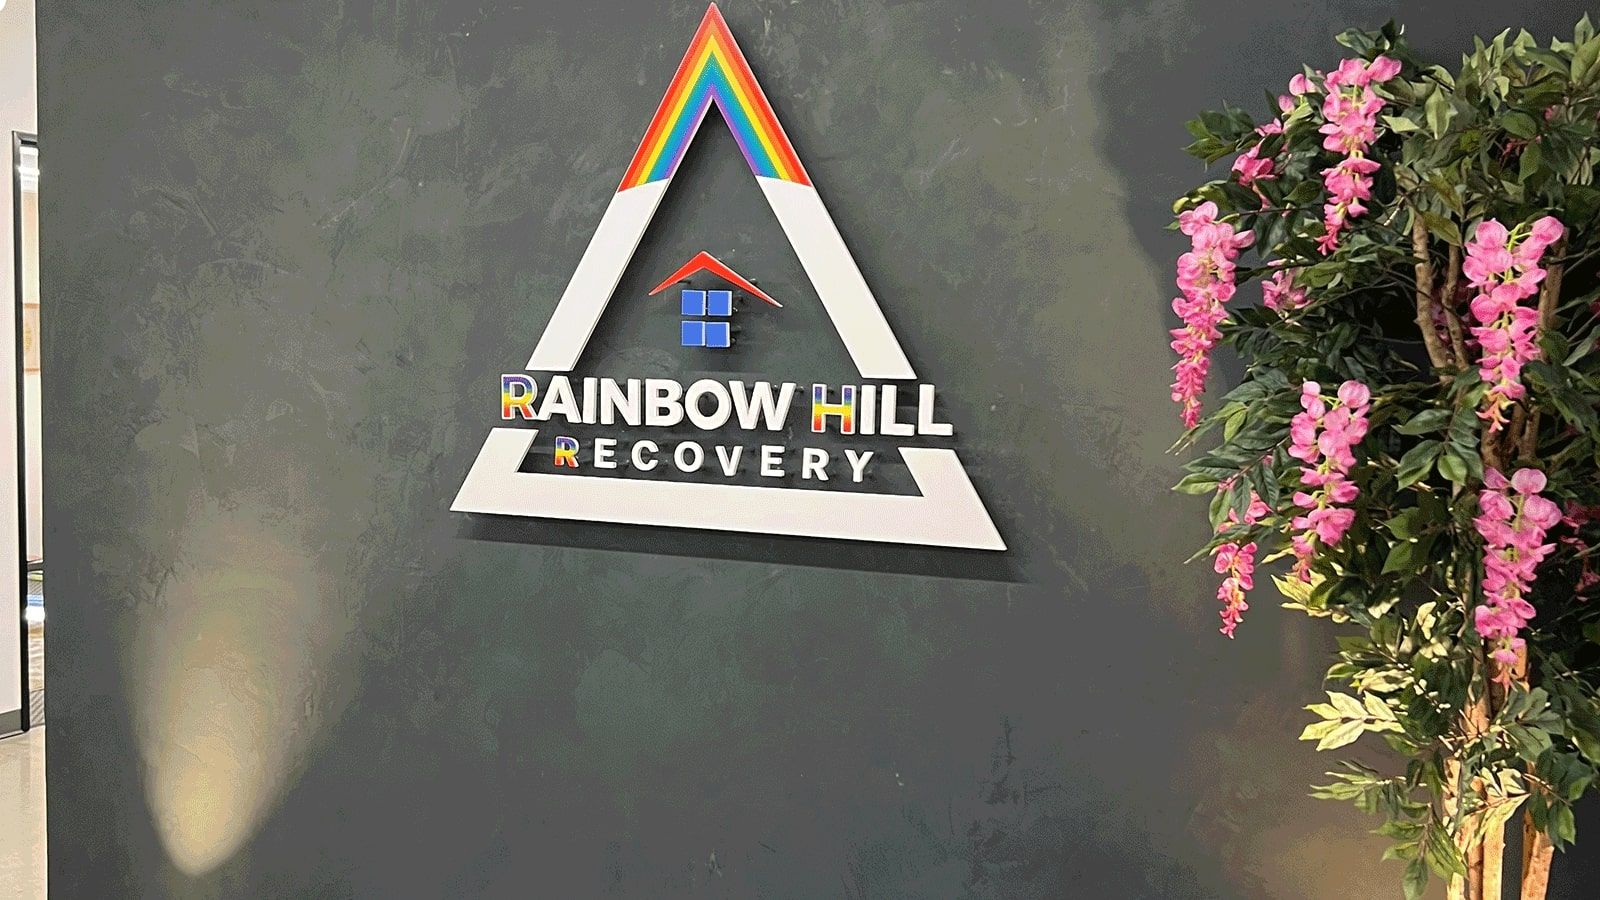 Rainbow Hill Recovery 3D sign installed on the wall